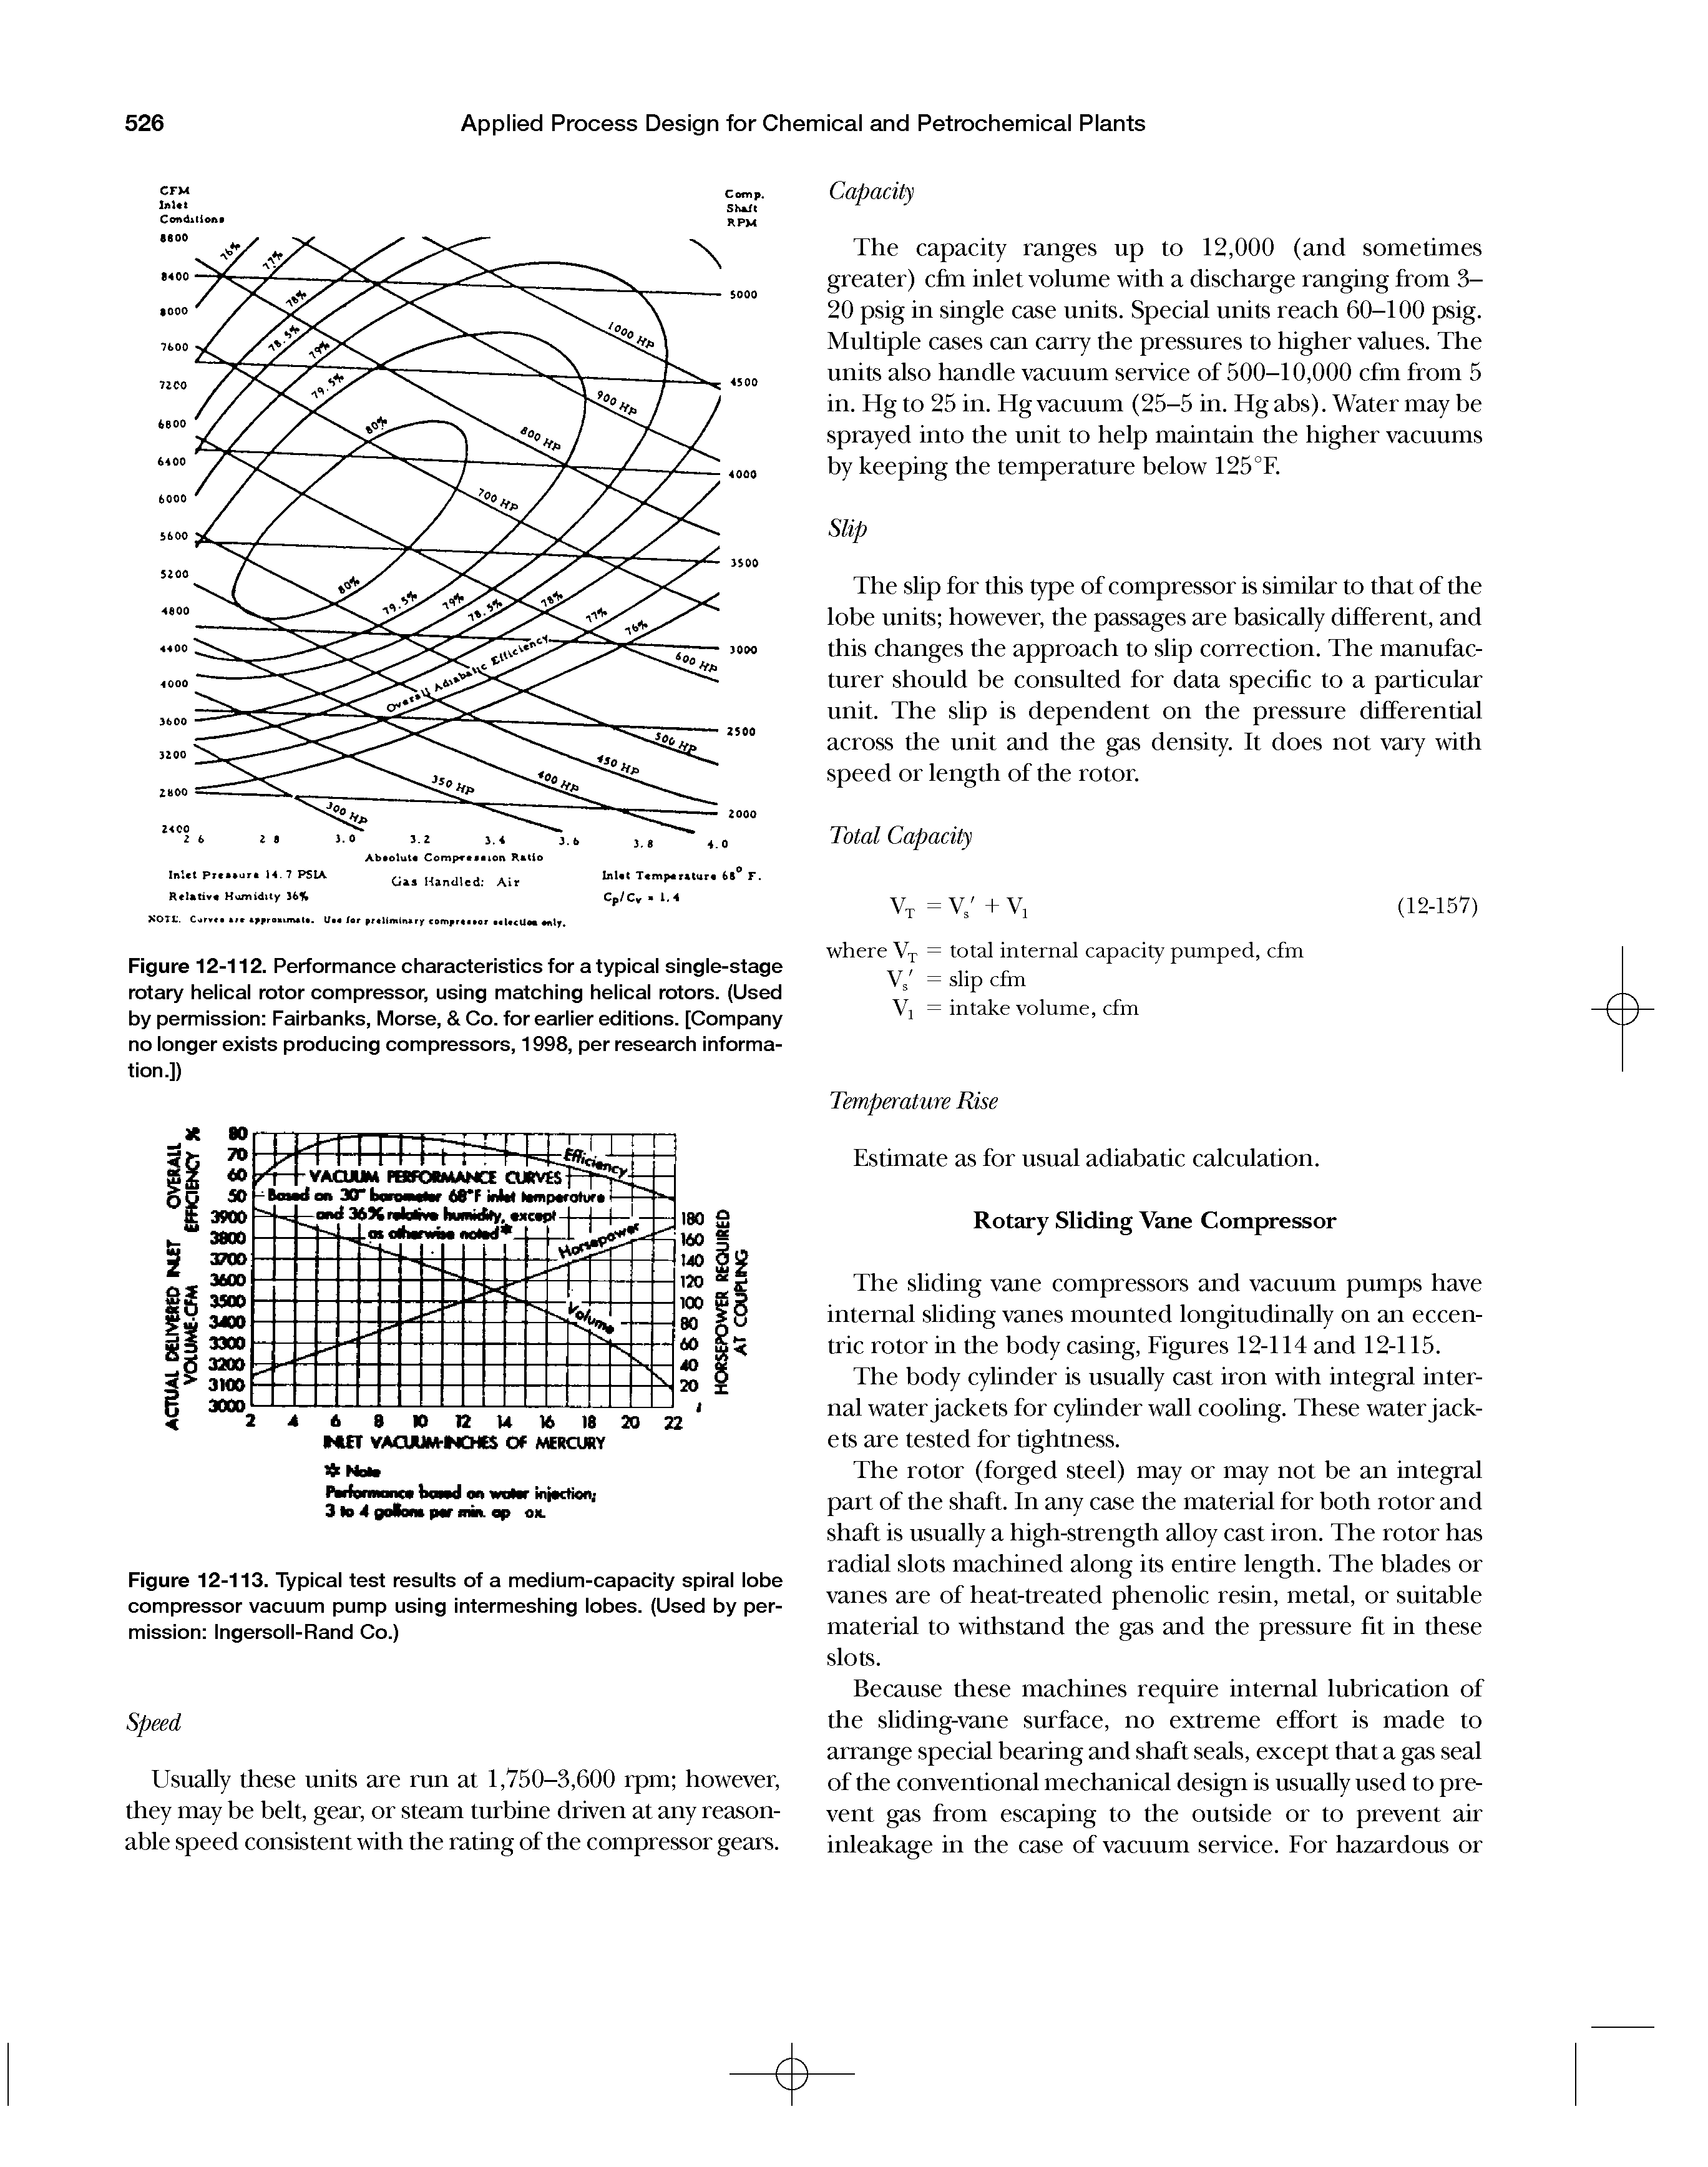 Figure 12-112. Performance characteristics for a typical single-stage rotary helical rotor compressor, using matching helical rotors. (Used by permission Fairbanks, Morse, Co. for earlier editions. [Company no longer exists producing compressors, 1998, per research information.])...